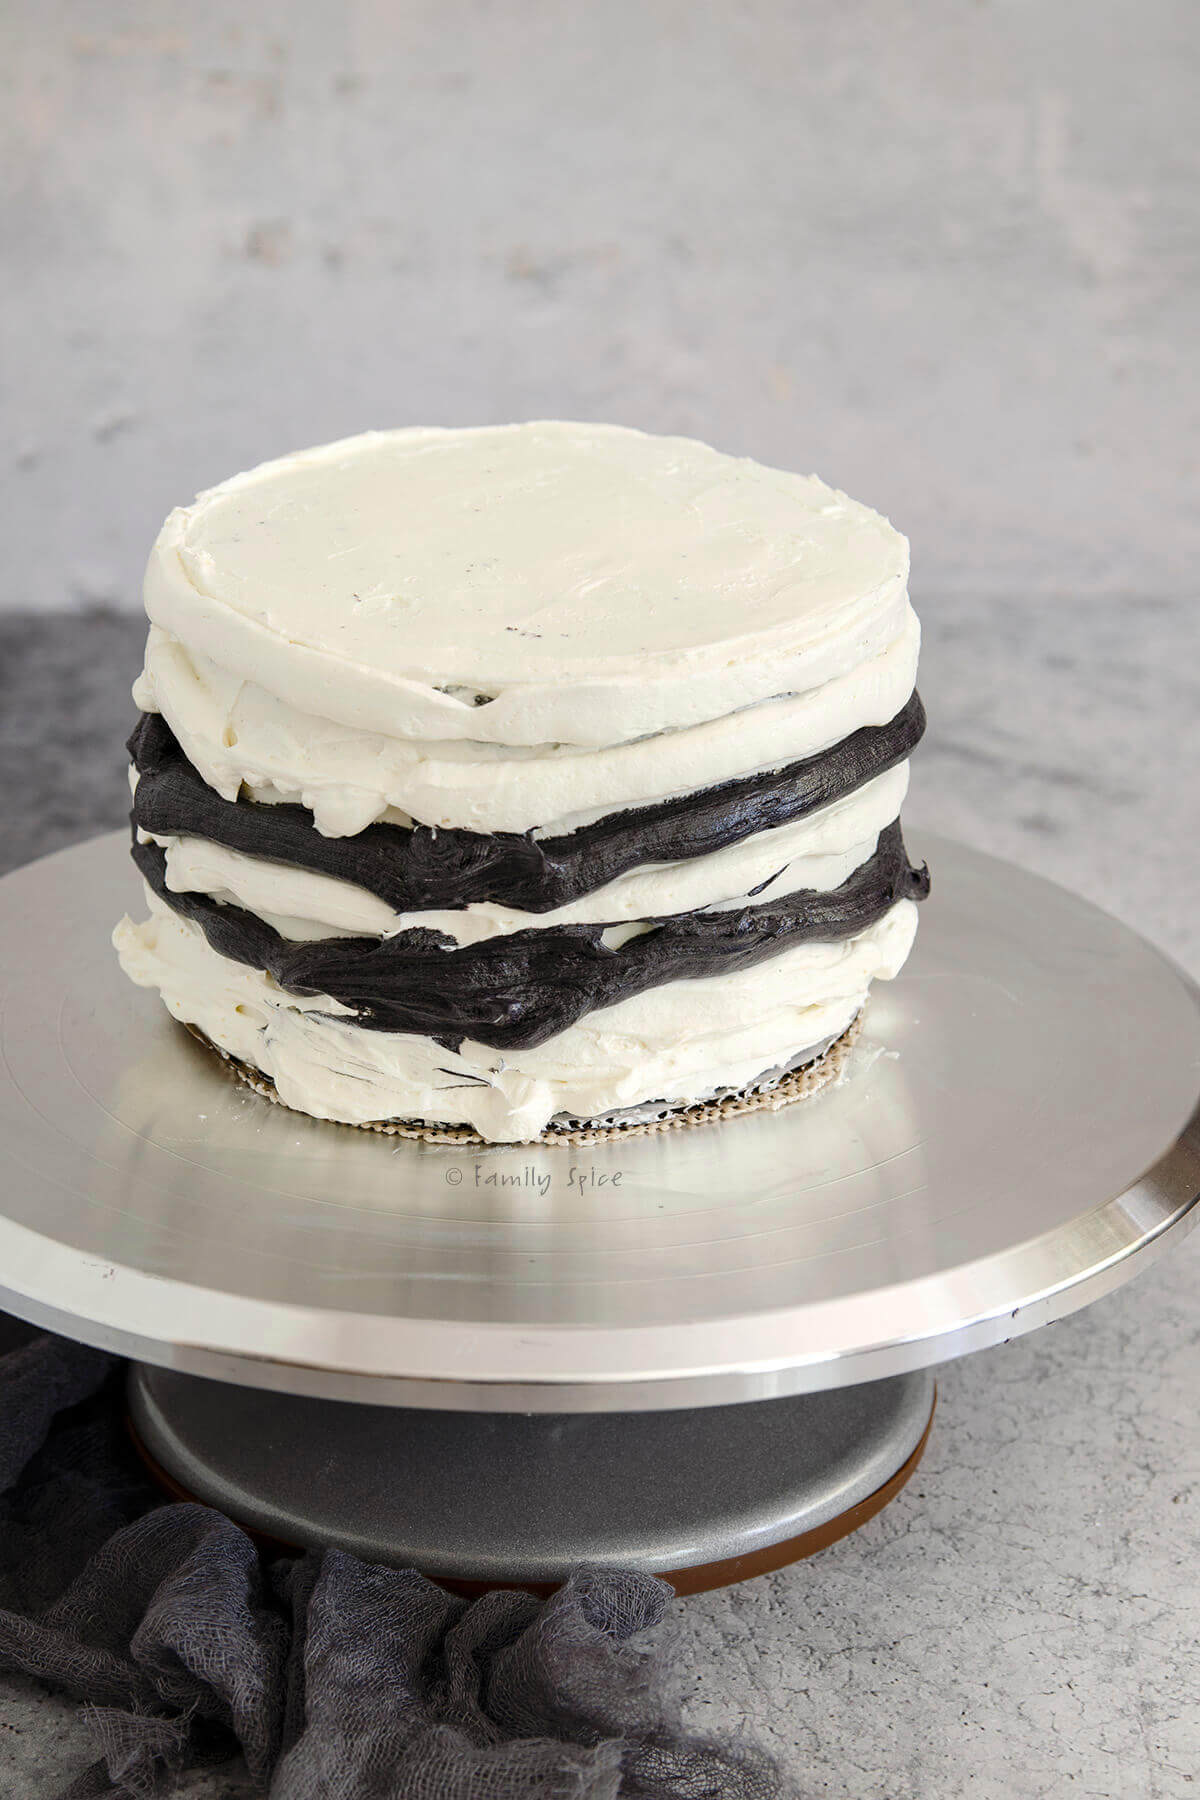 A 3-layer 6-inch cake with white and black frosting piped on it on a stainless cake stand